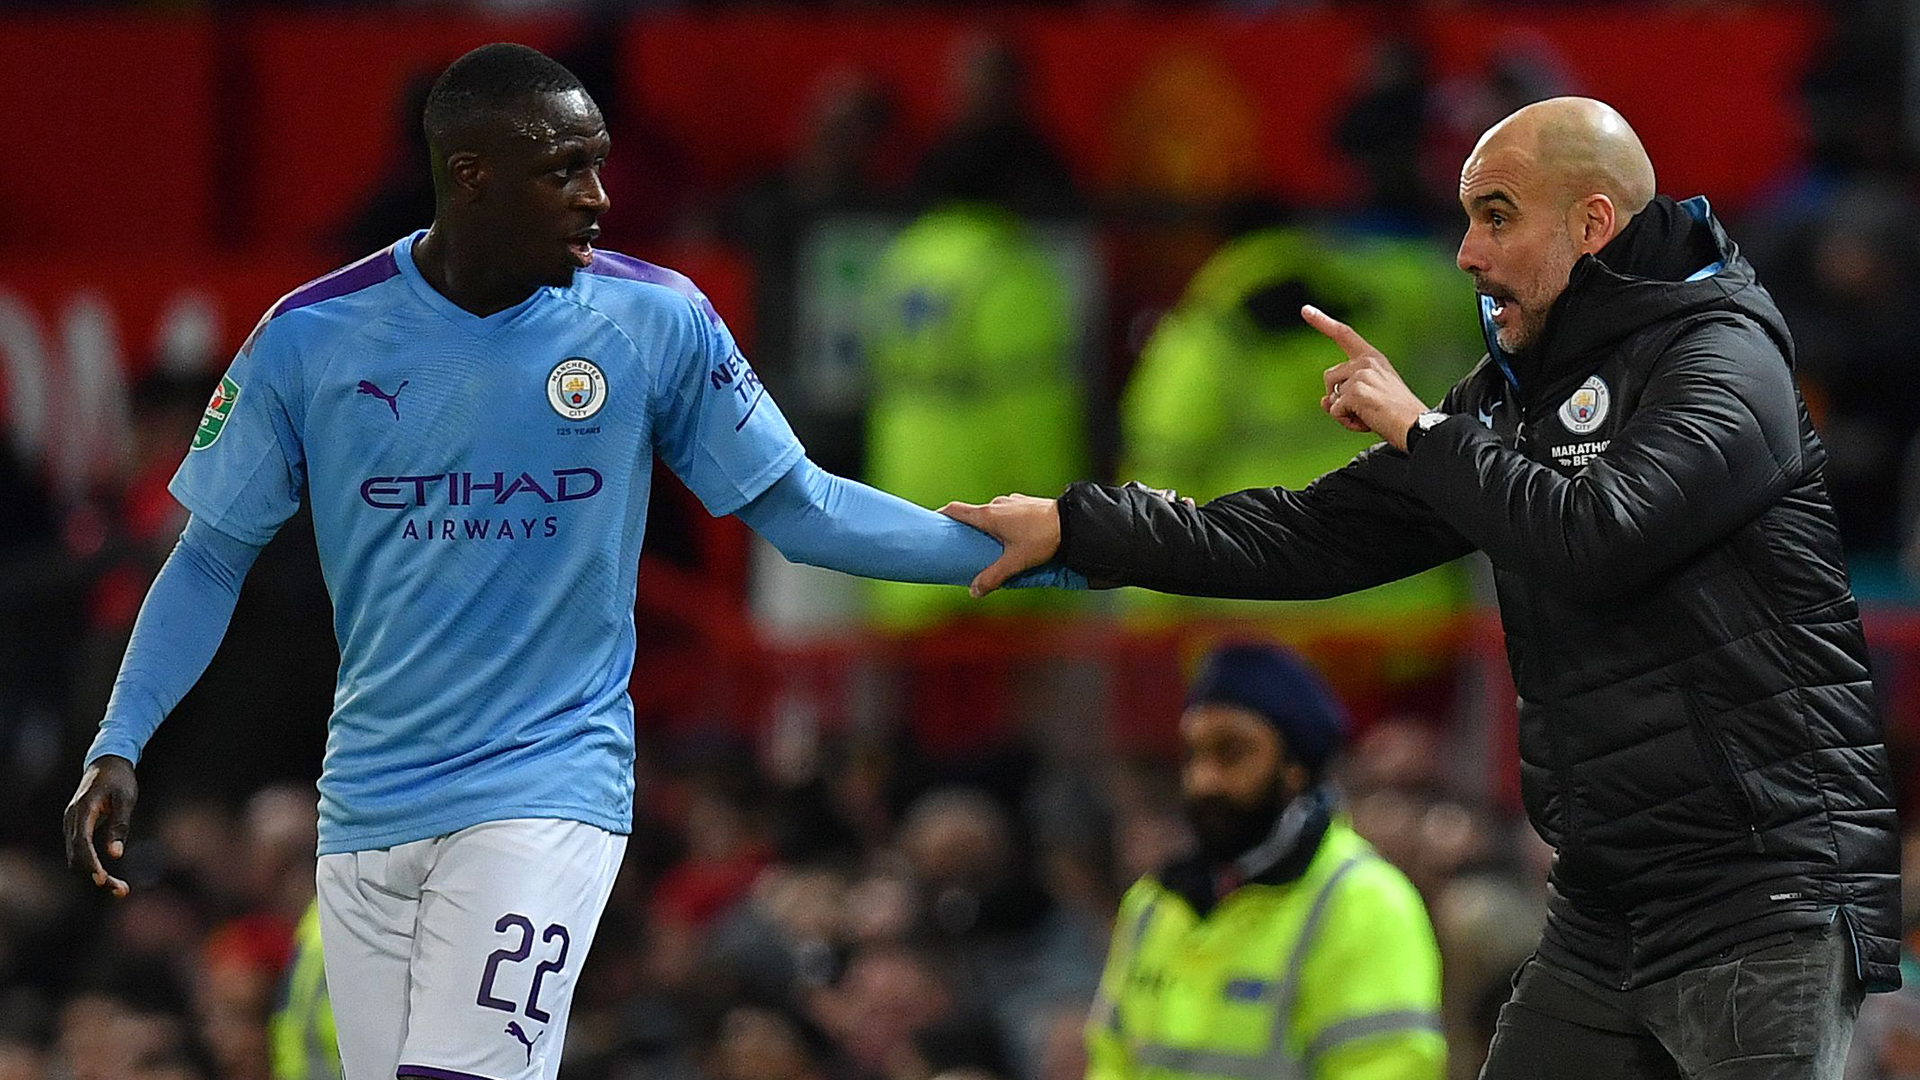 Mendy happy to know he is missed by Man City boss Guardiola